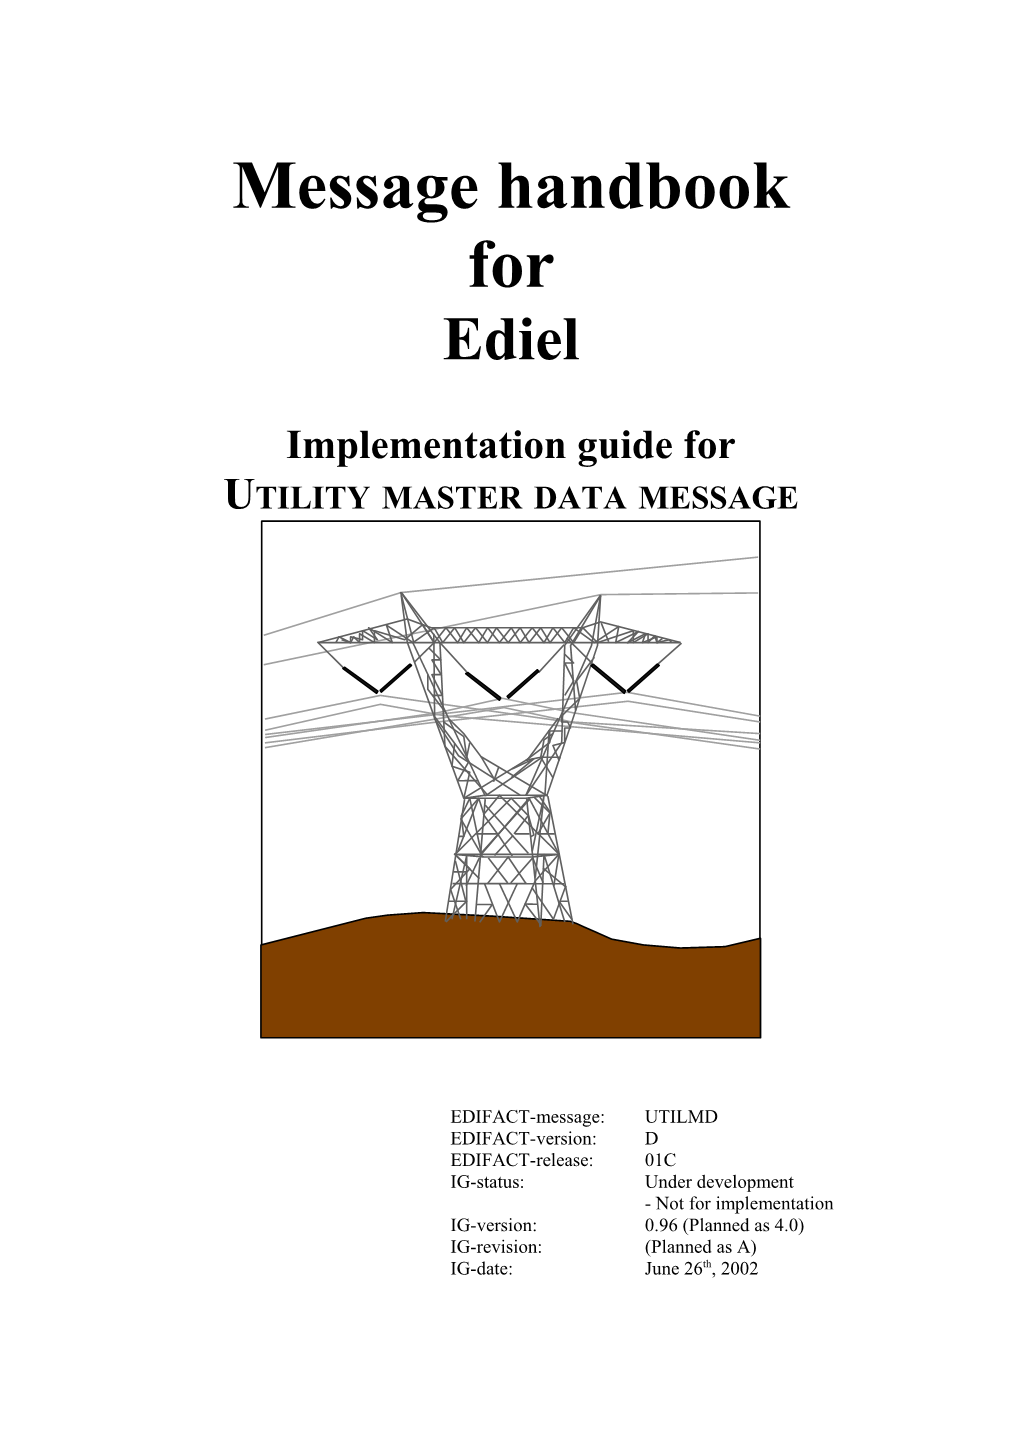 Implementation Guide for Utility Master Data Message 17